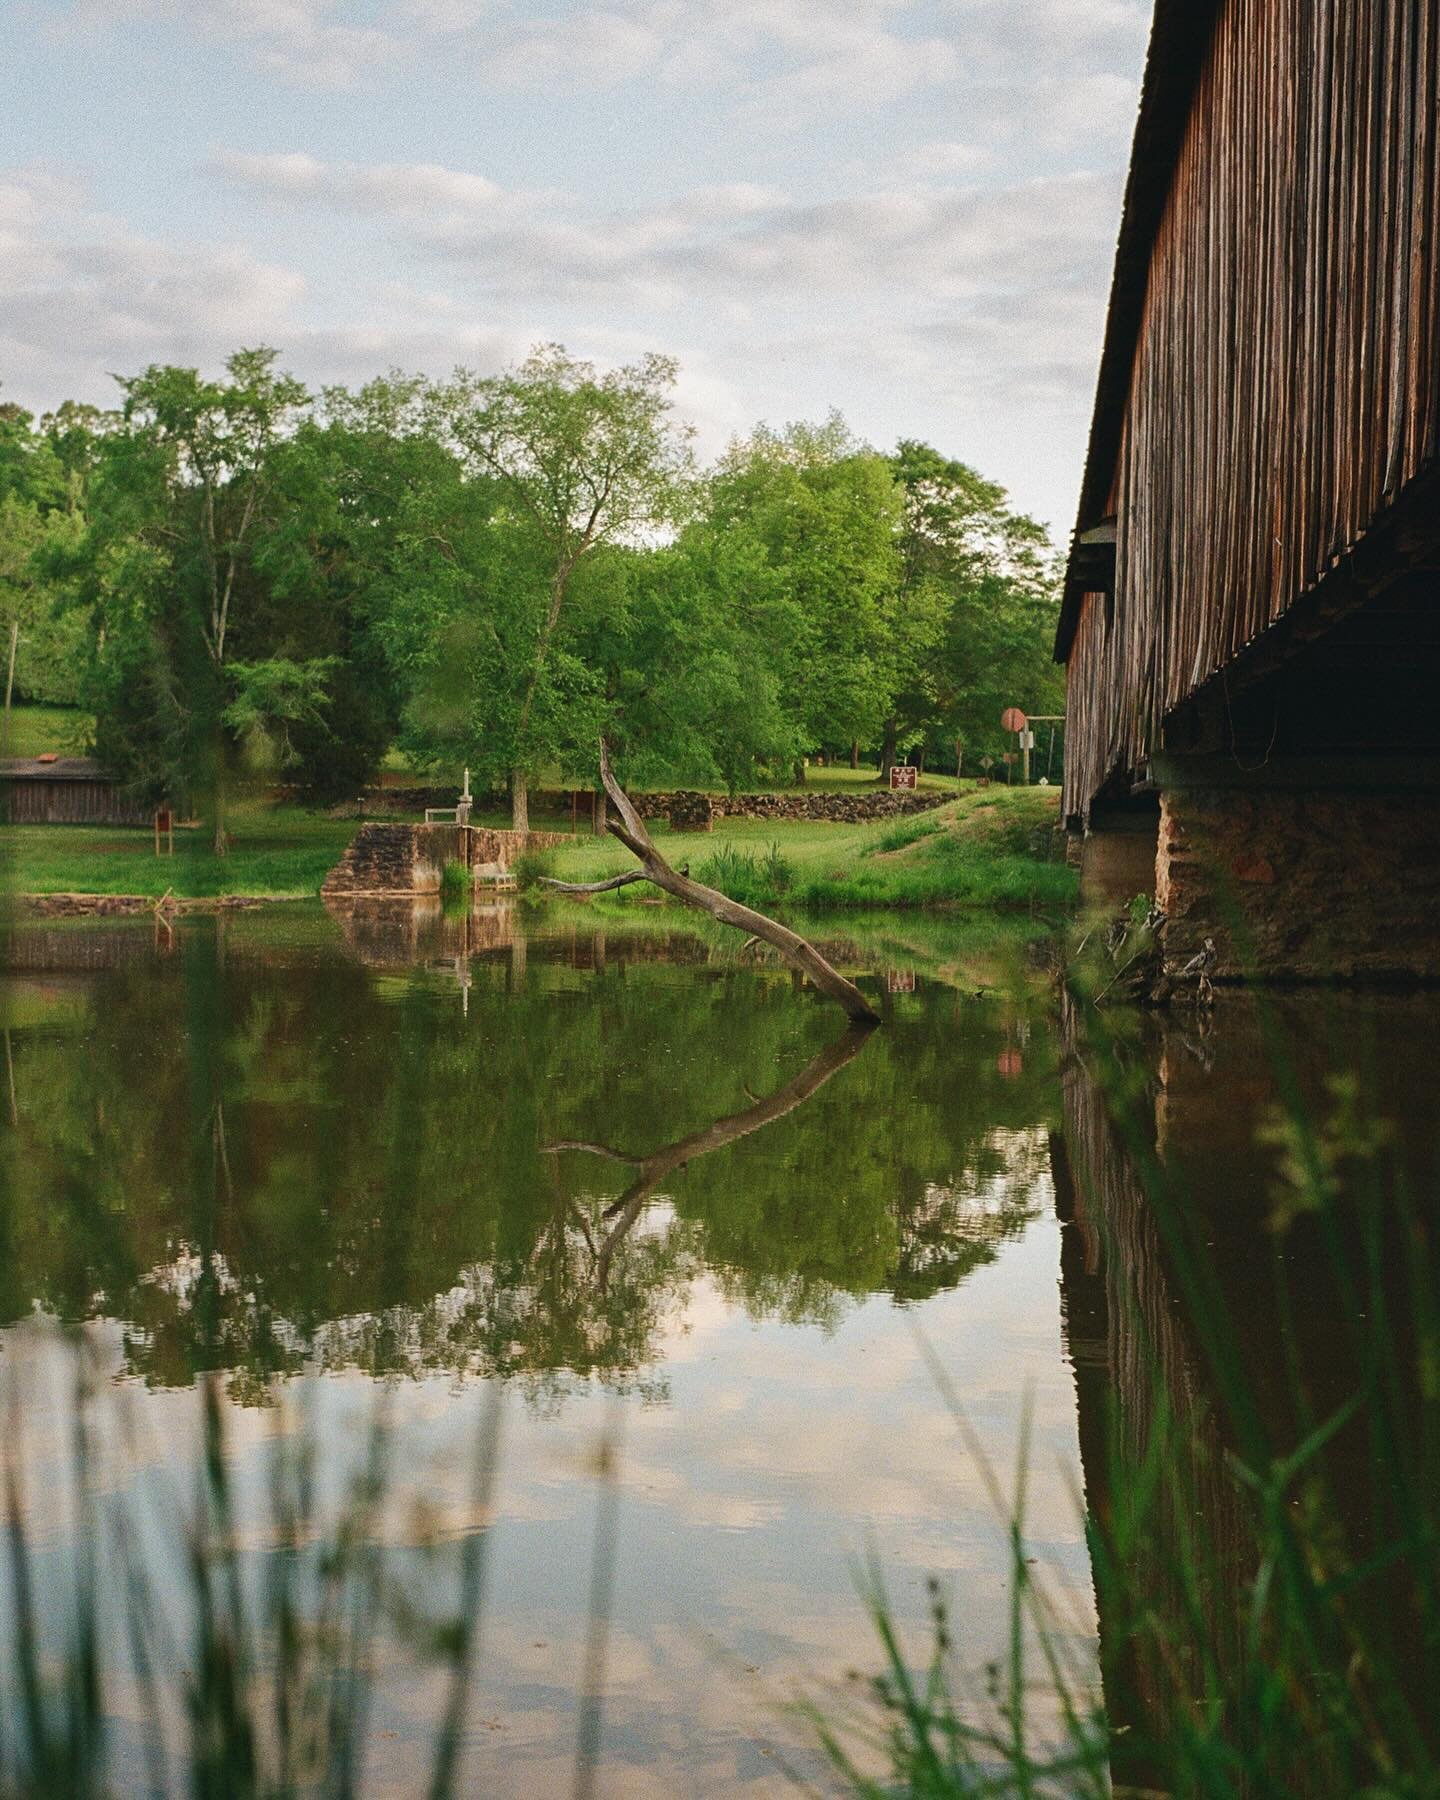 A series of reflections 🪞 

I took so many photos at this location! Each one unique, but this particular visit to Watson Mill I was rewarded with calm waters and beautiful clouds that enabled me to capture these images 🩷

📷 #leicam6
🎞️ #kodak400
